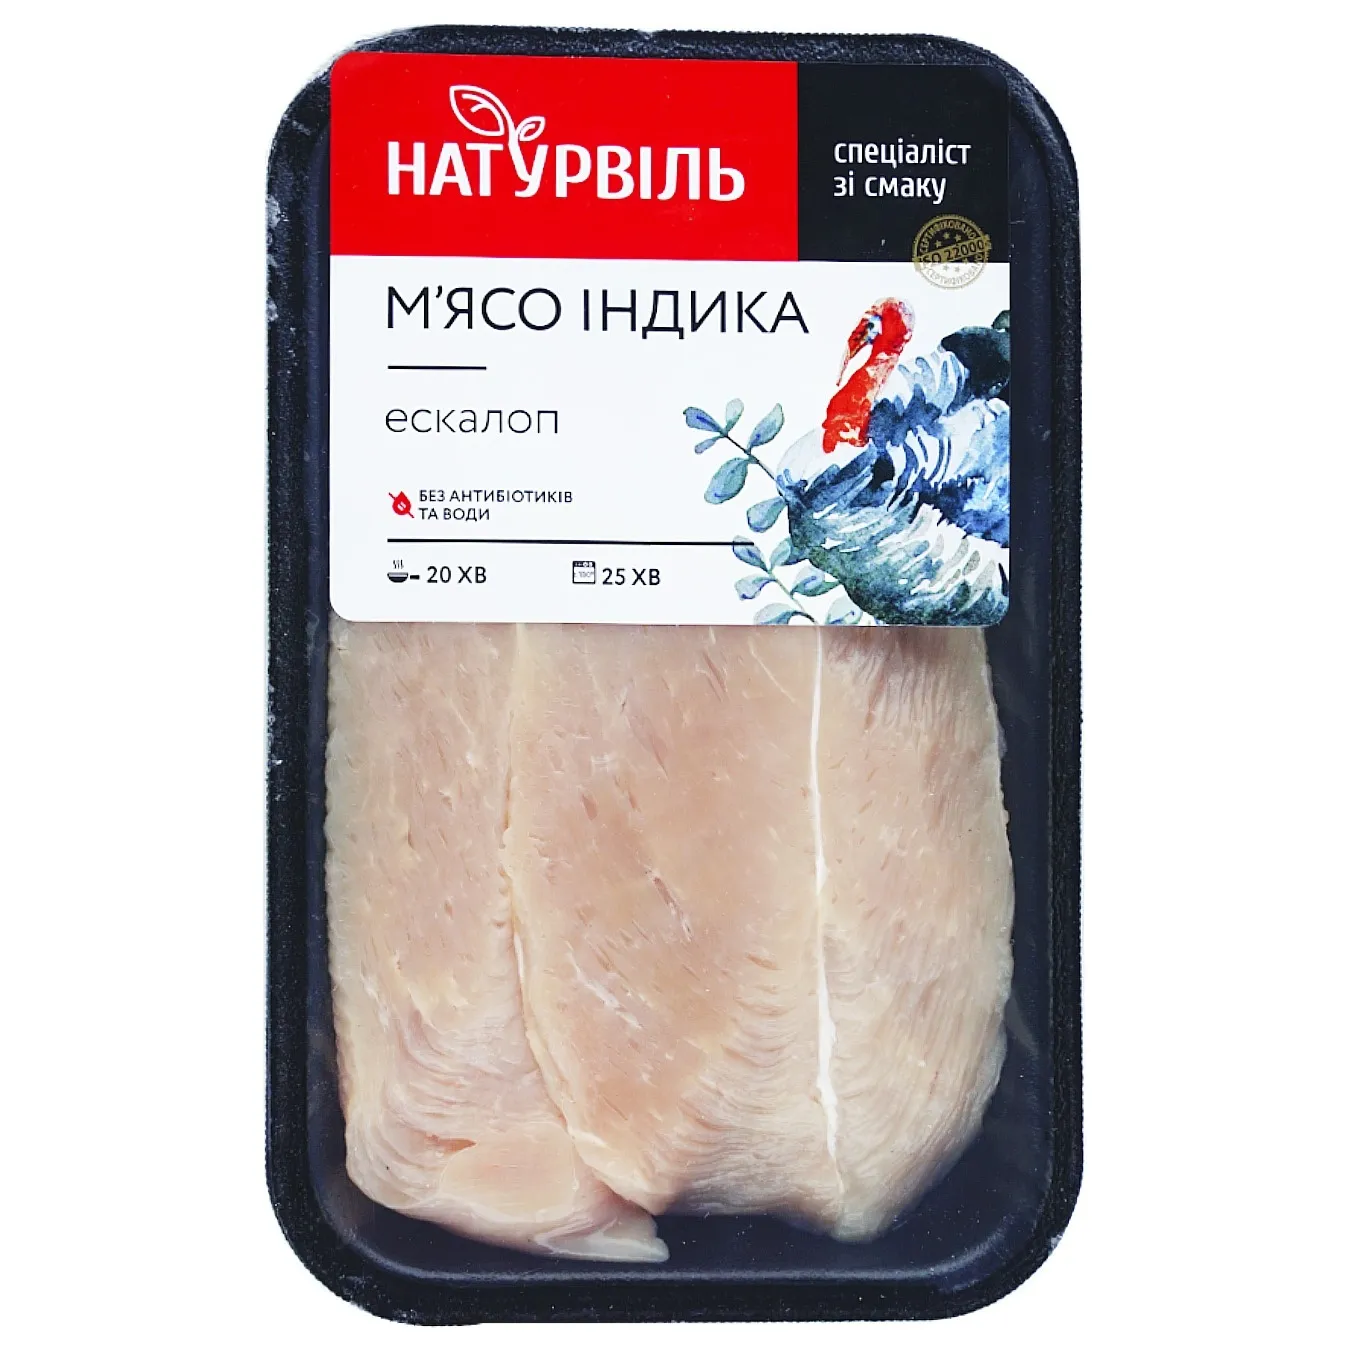 Naturville turkey escalope 250-500 grams in a package